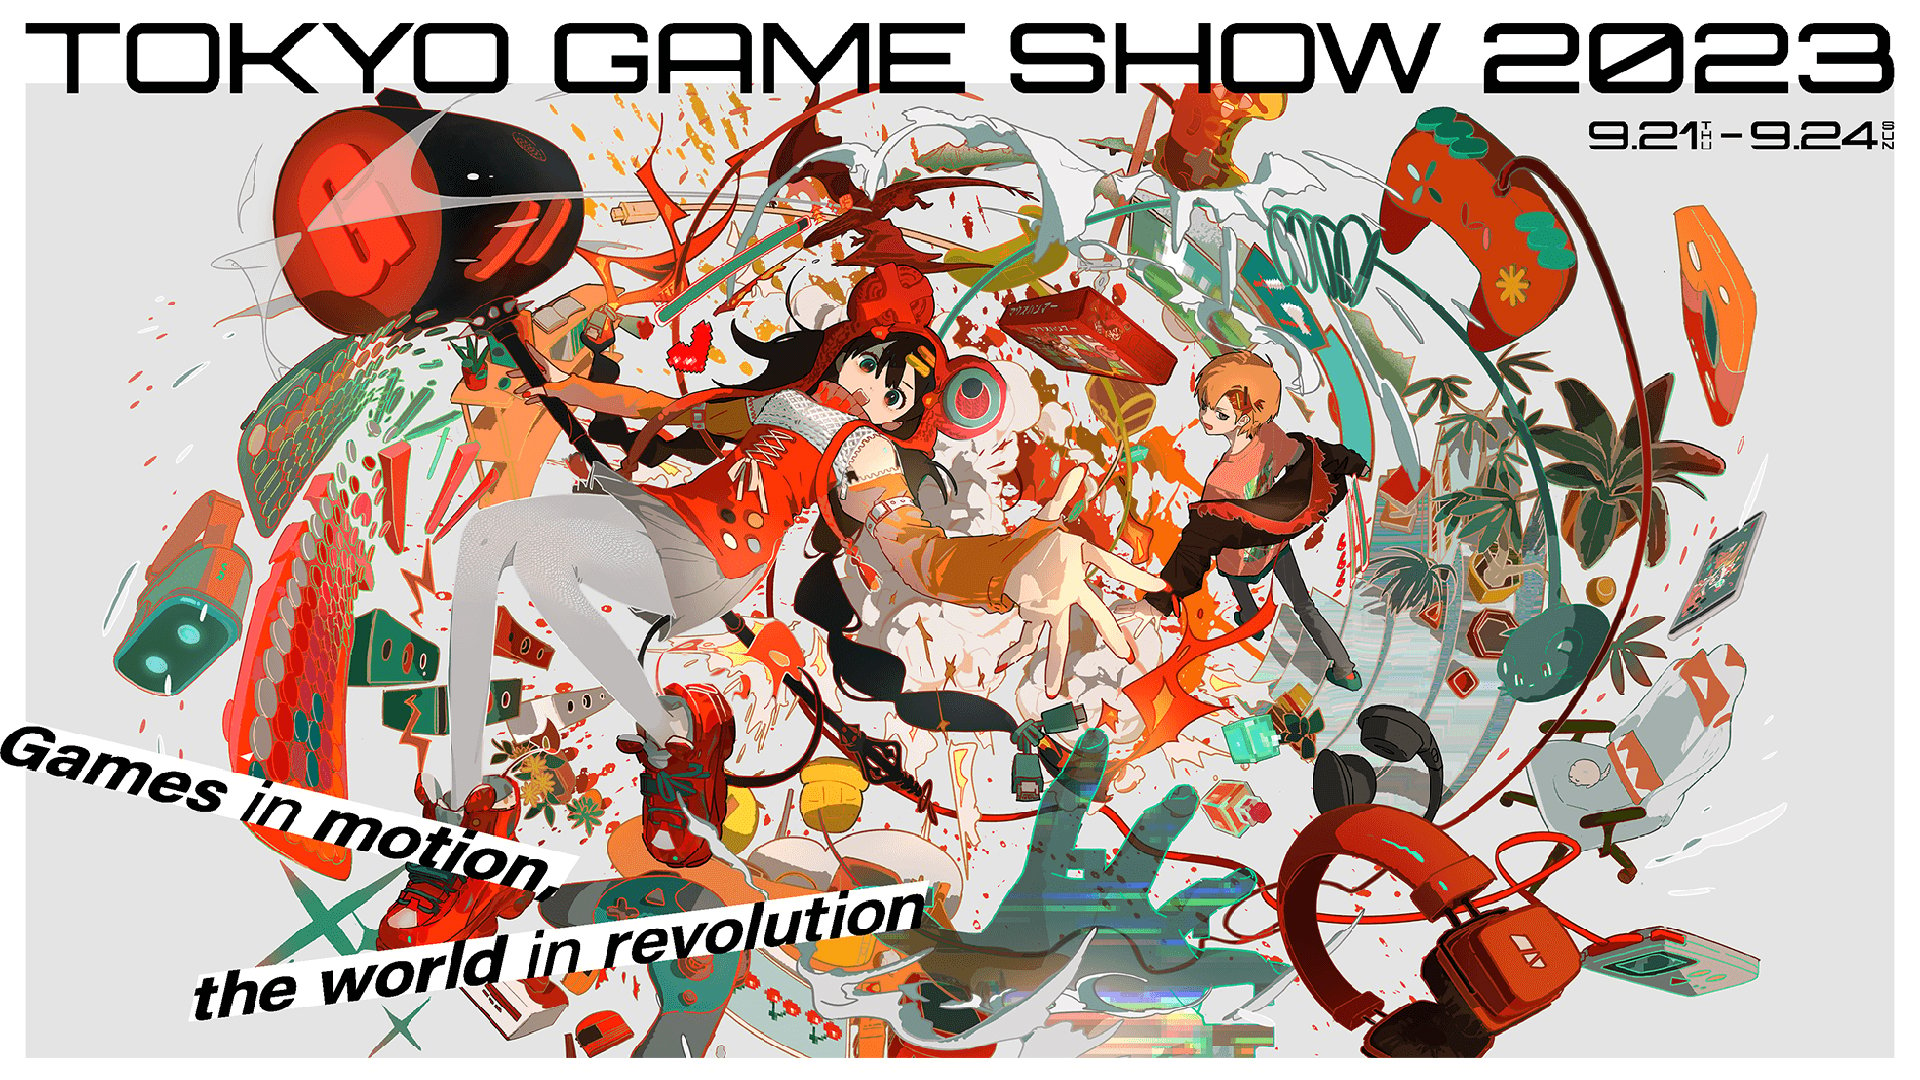 The streaming schedule for Tokyo Game Show has been released 108GAME